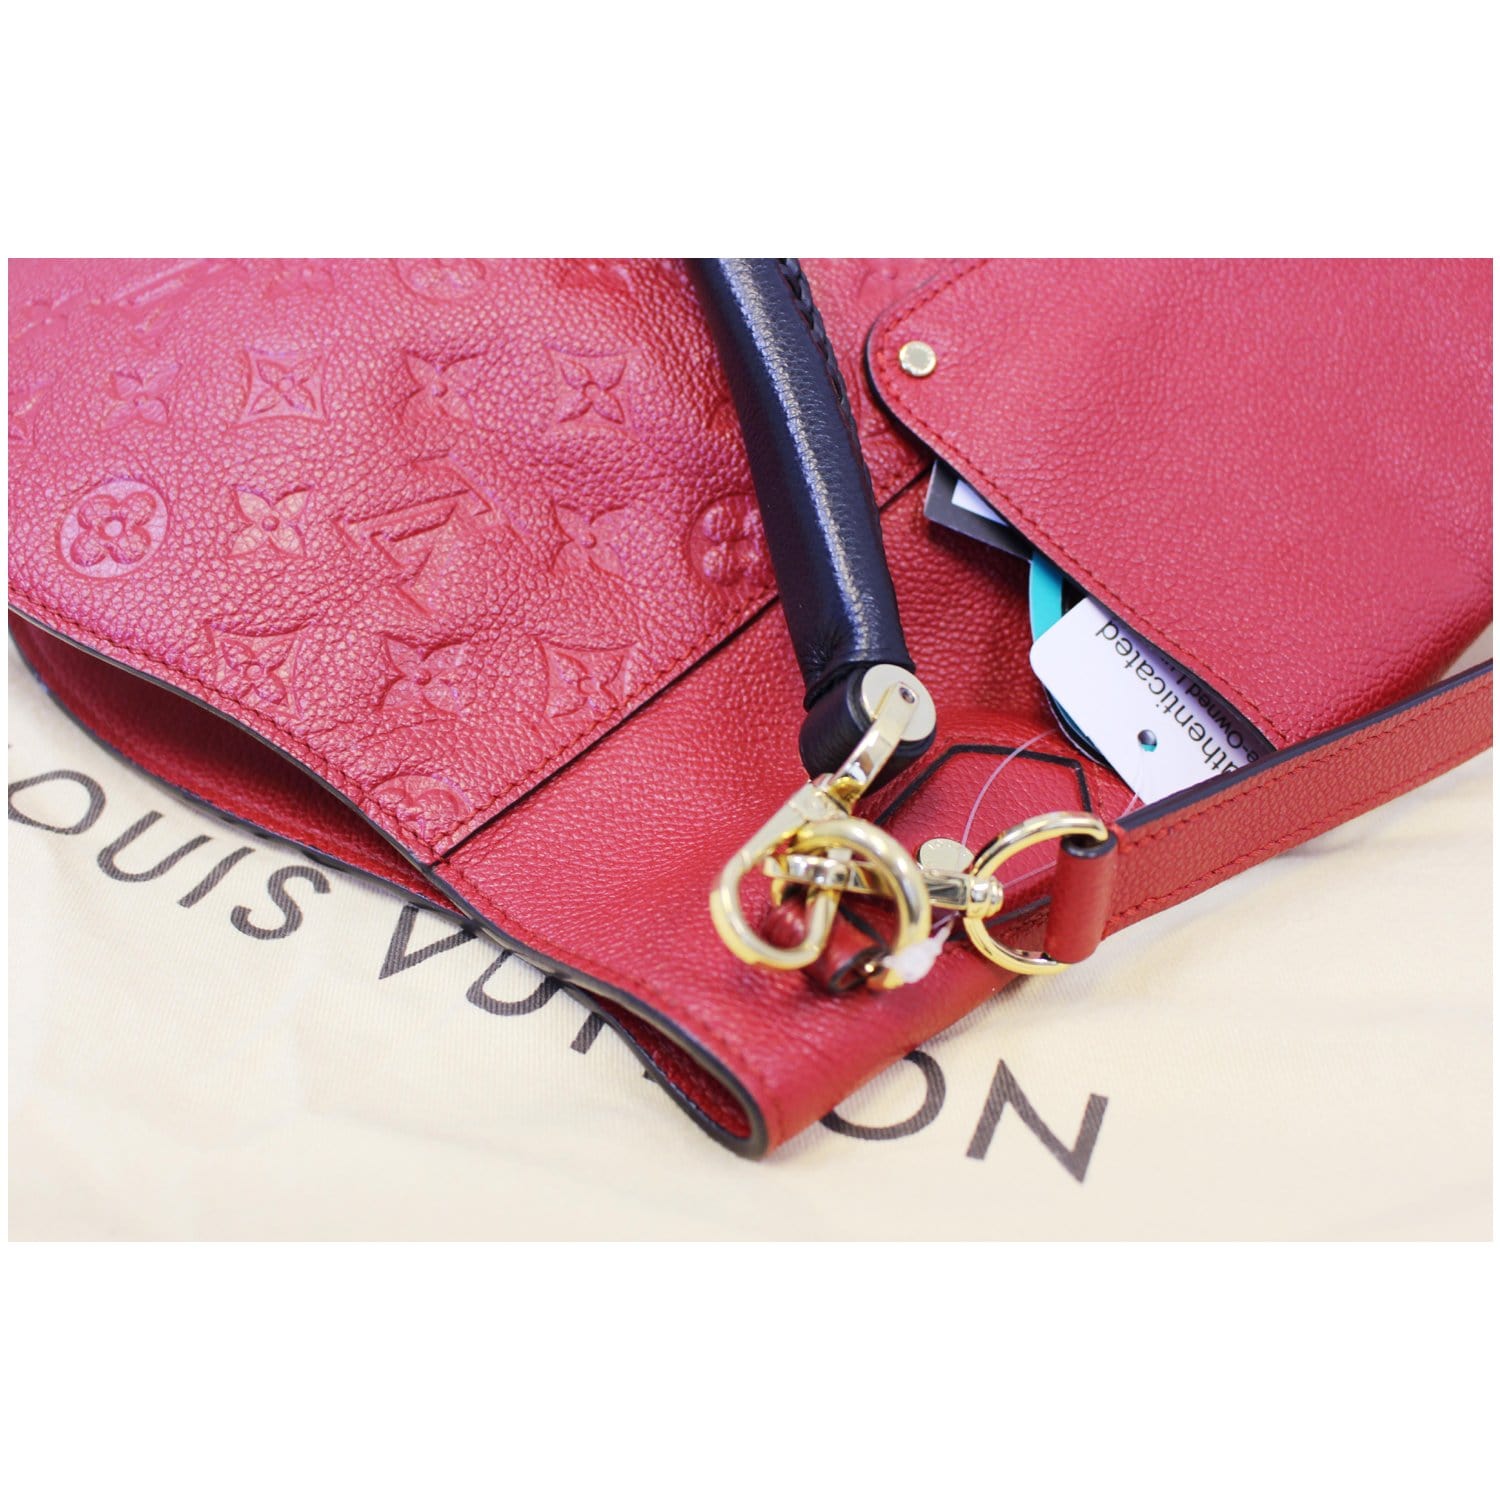 Louis Vuitton - Authenticated Bagatelle Handbag - Leather Pink for Women, Very Good Condition